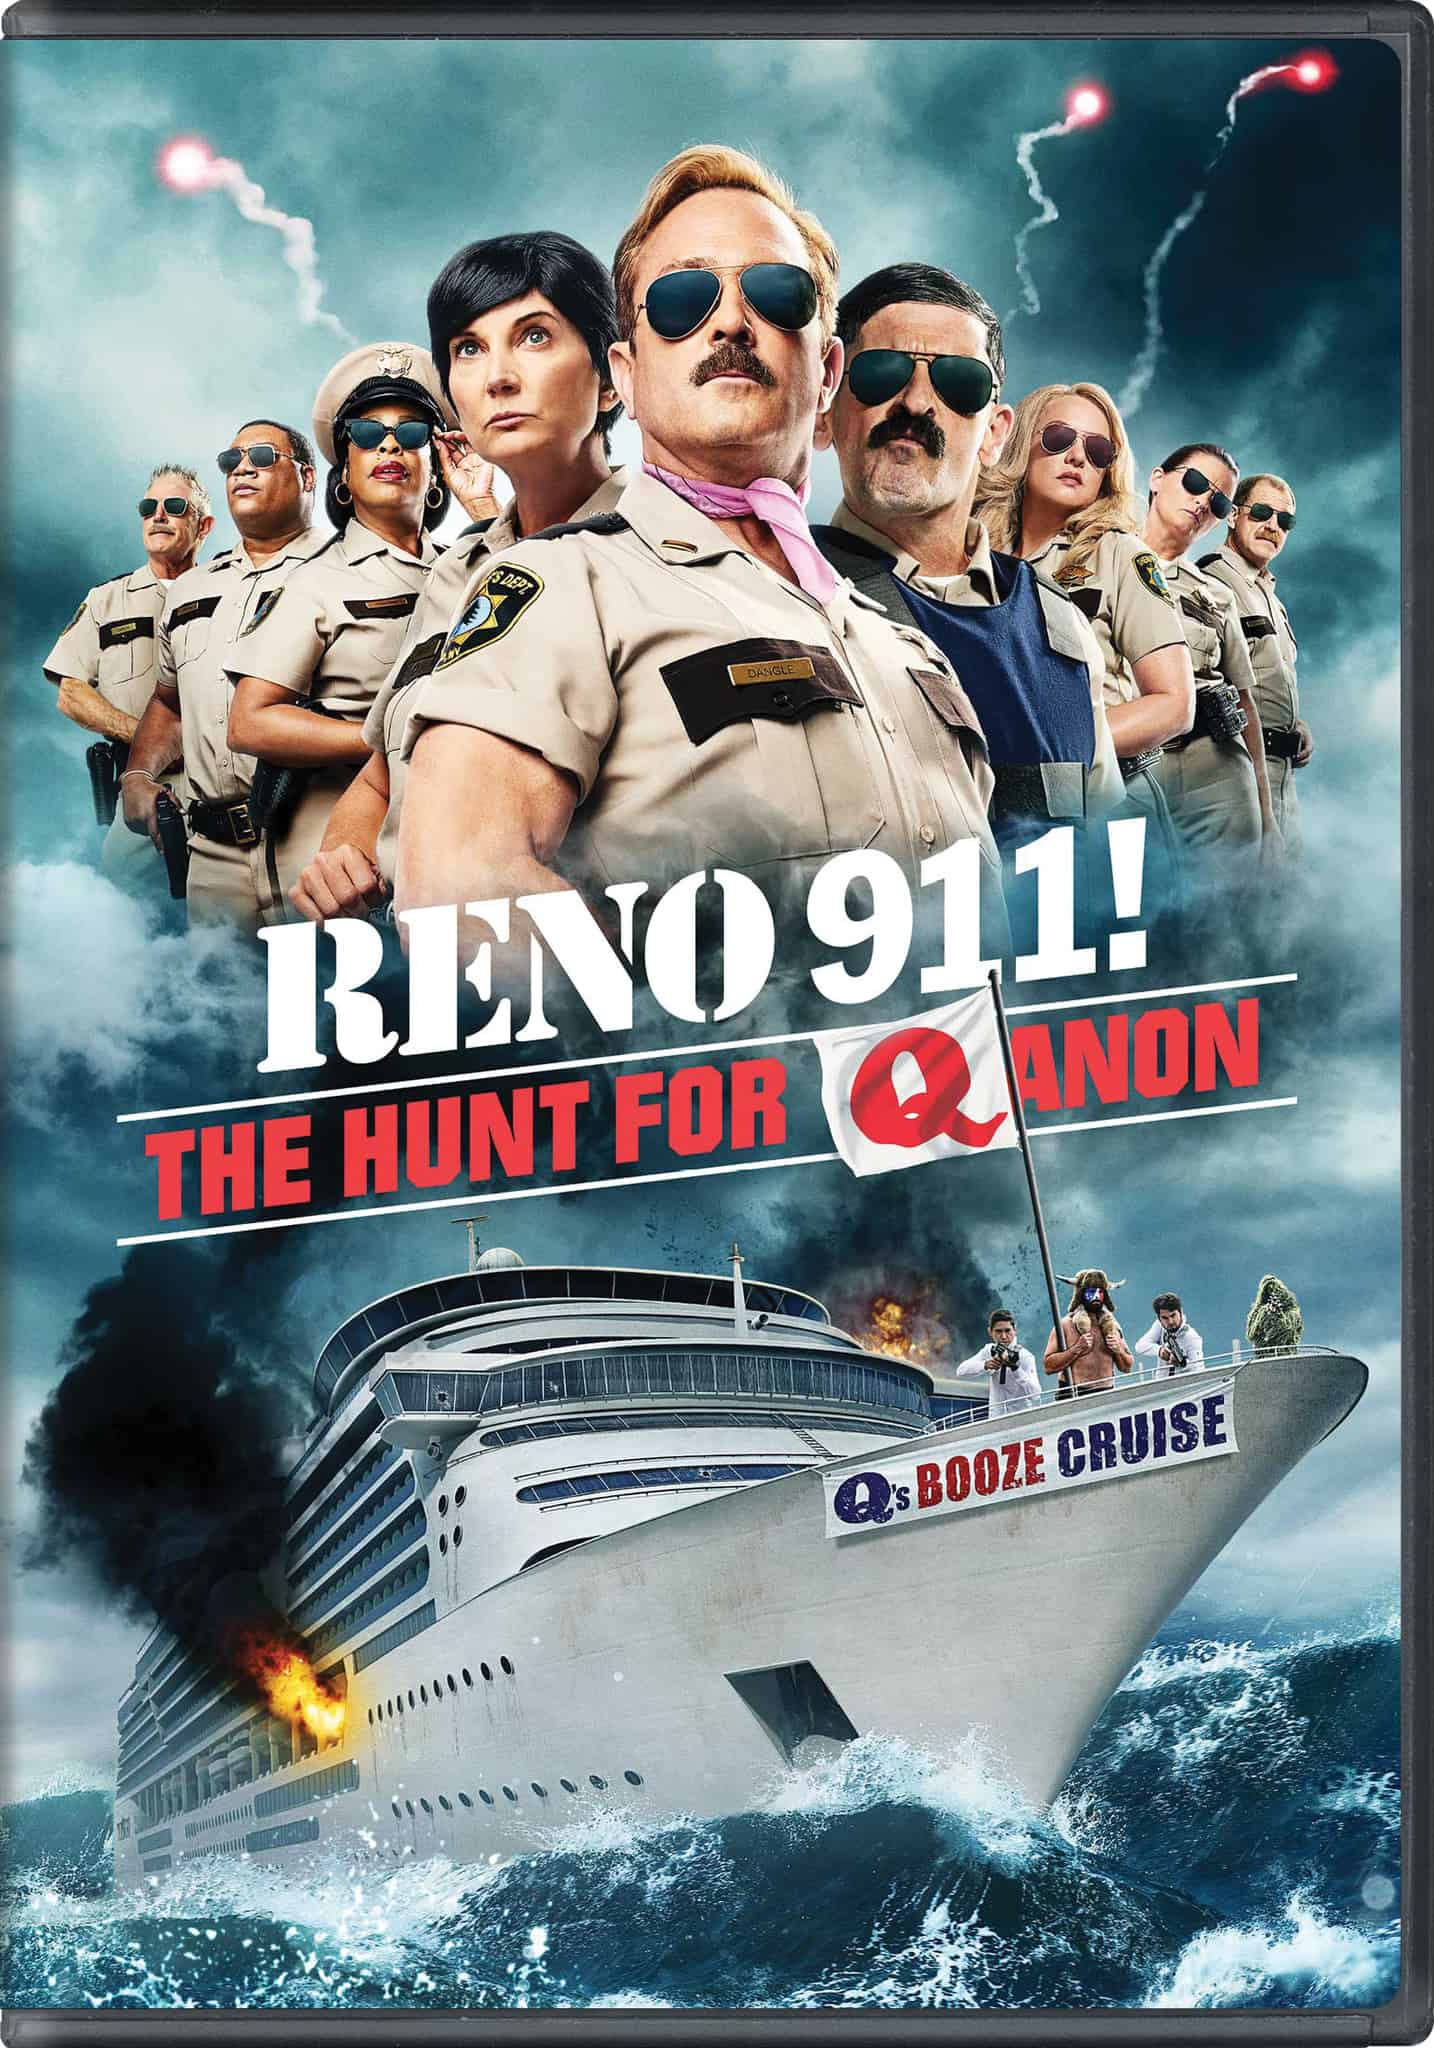 Reno 911! The Hunt for QANON comes to DVD this July 19th 2